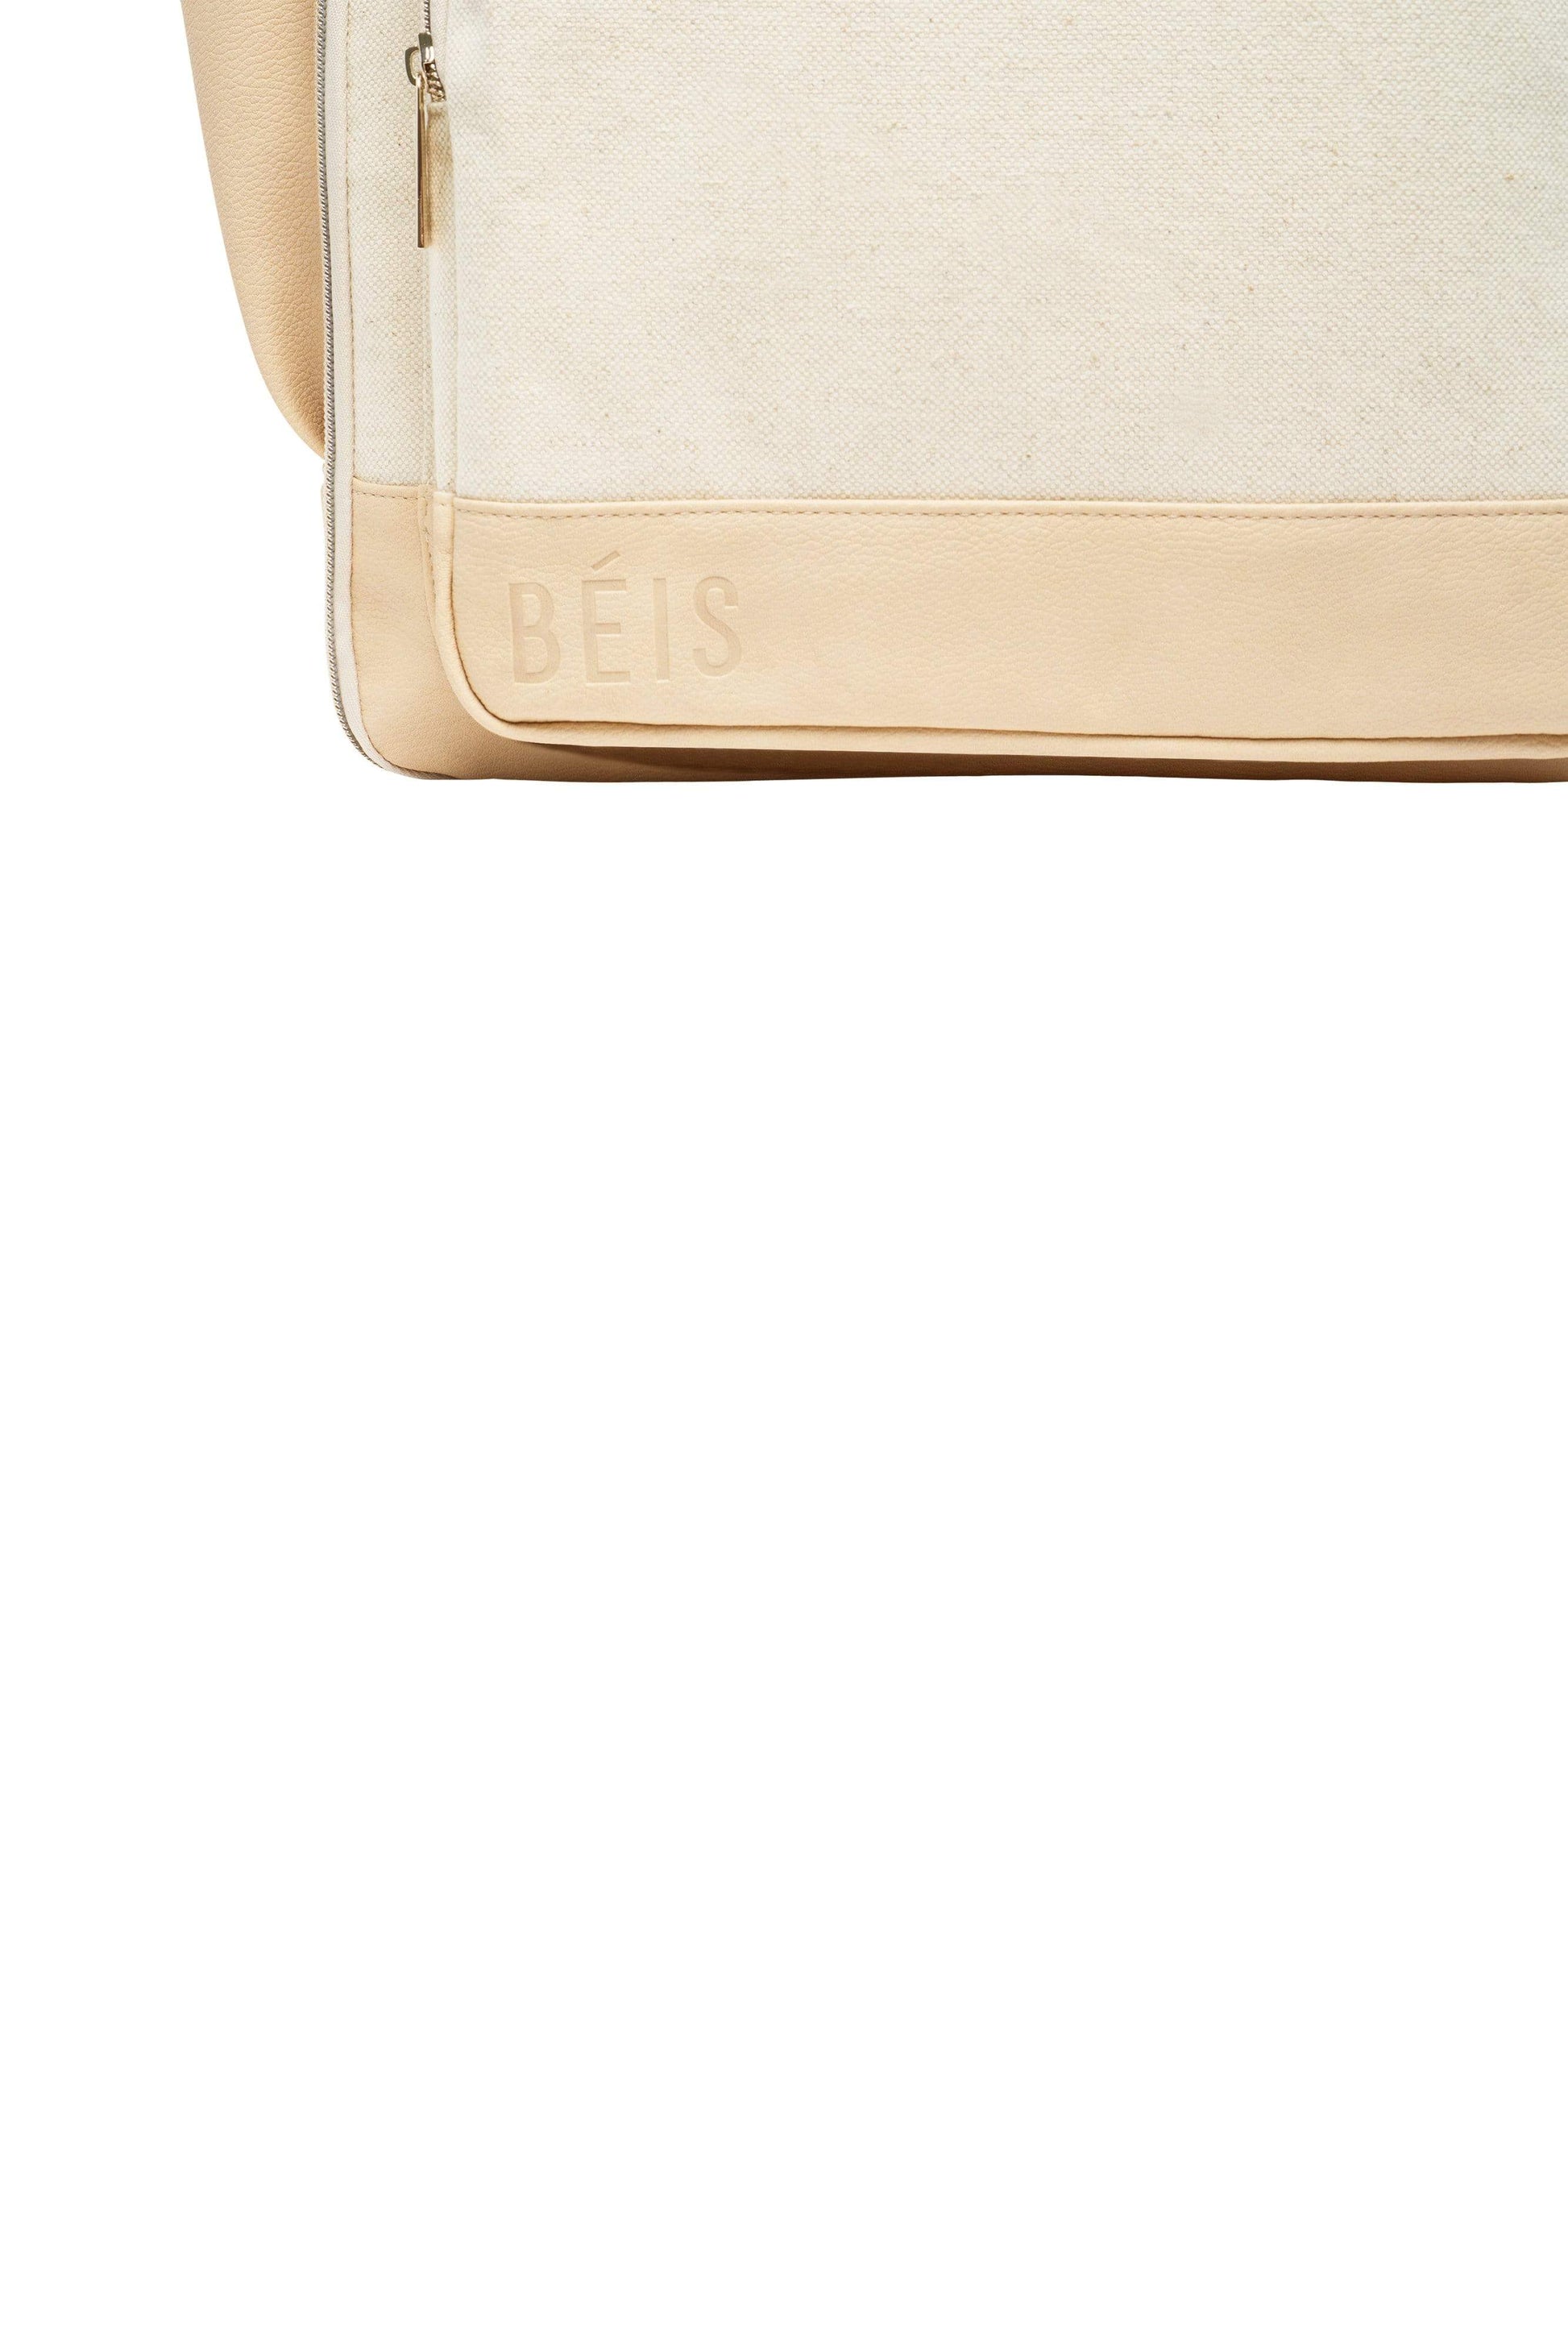 BEIS by Shay Mitchell | The Backpack in Beige - Logo Detail